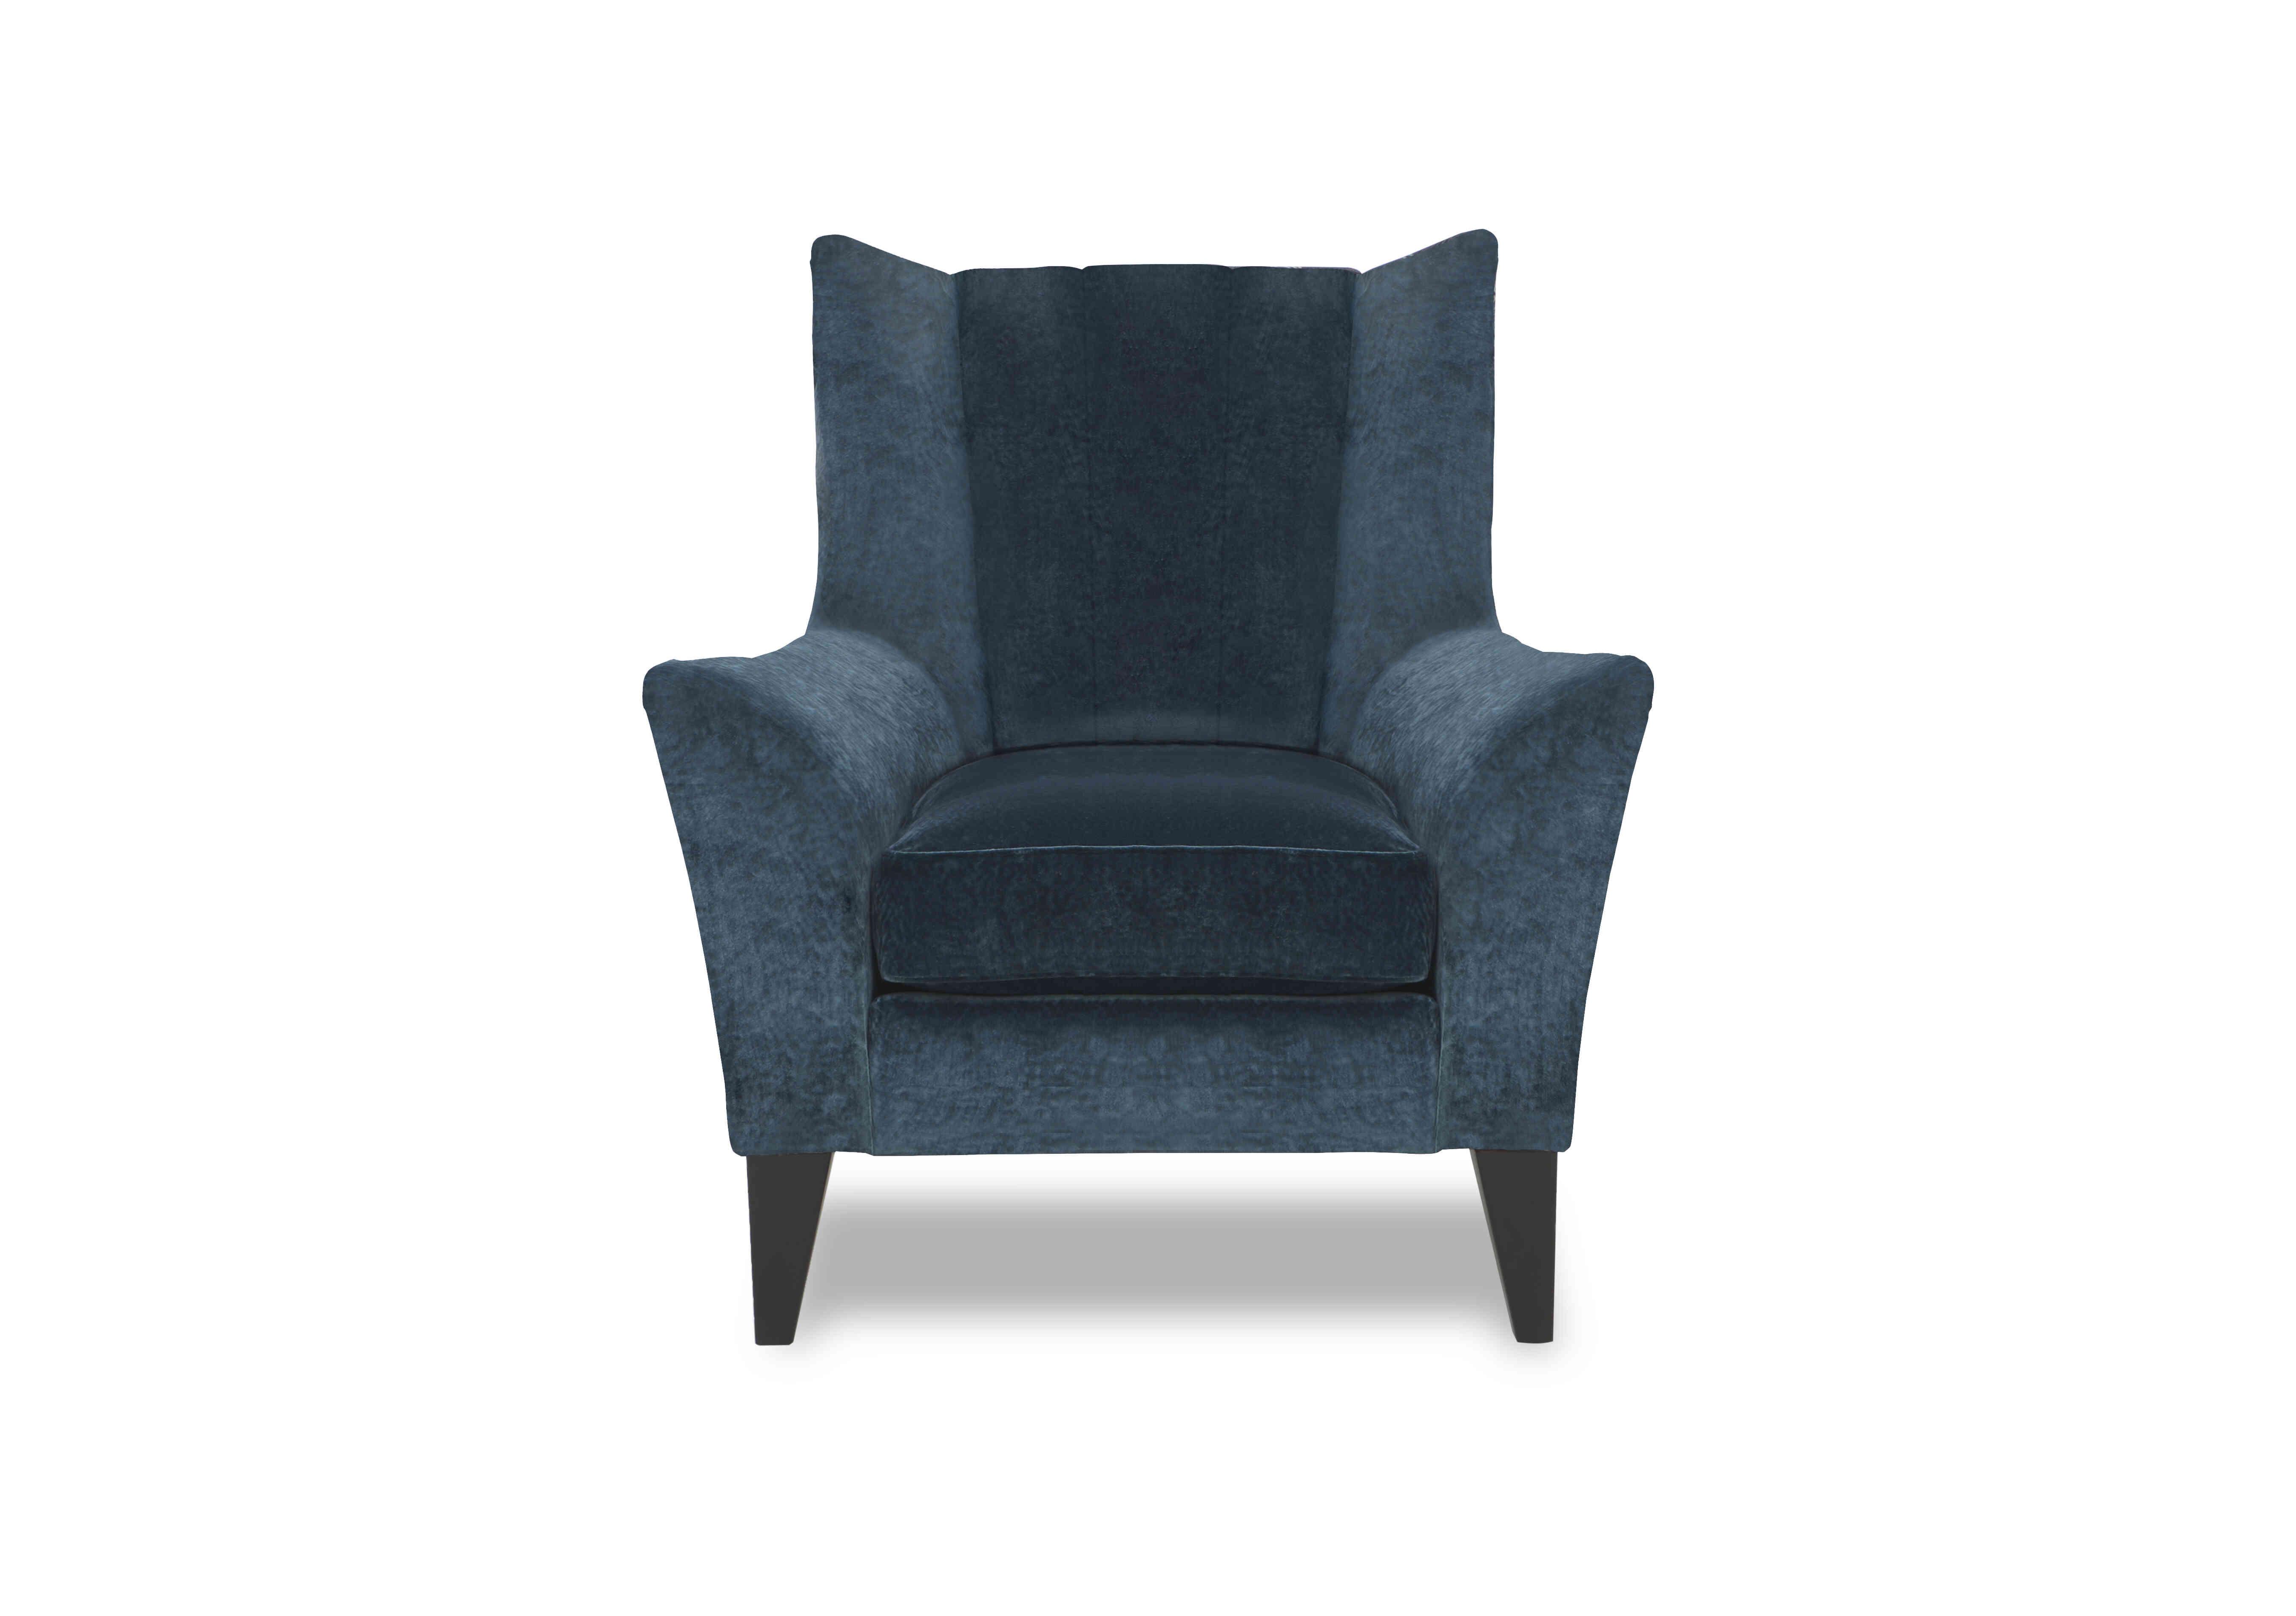 Modern Classics Fluted Chair in Remini Petrol Blue Sp Mf on Furniture Village